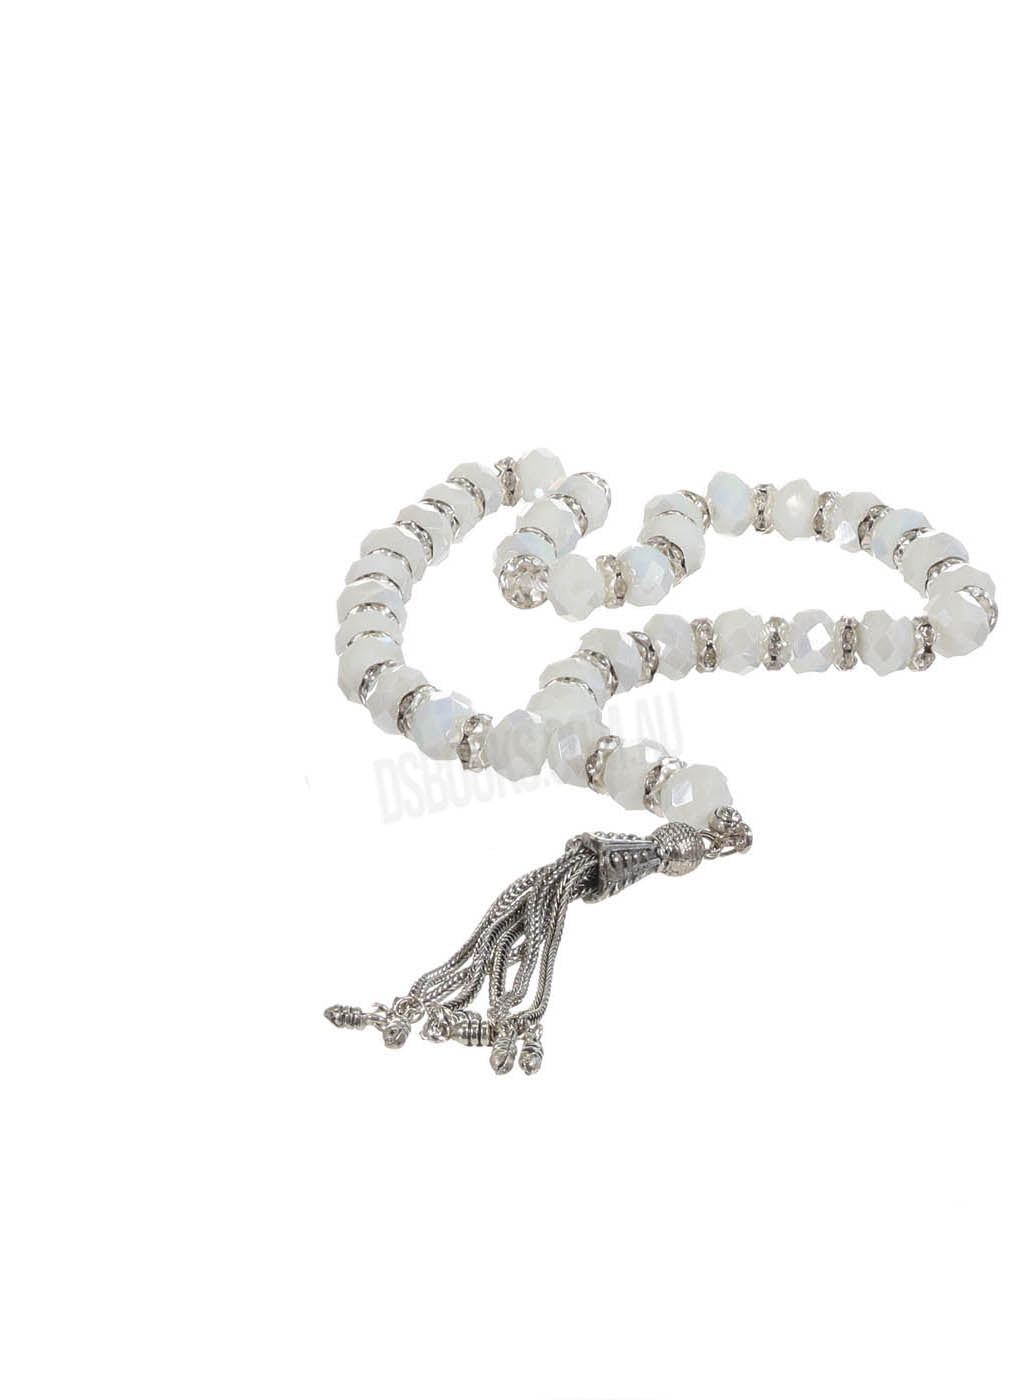 Deluxe Crystal White and Silver Tasbih